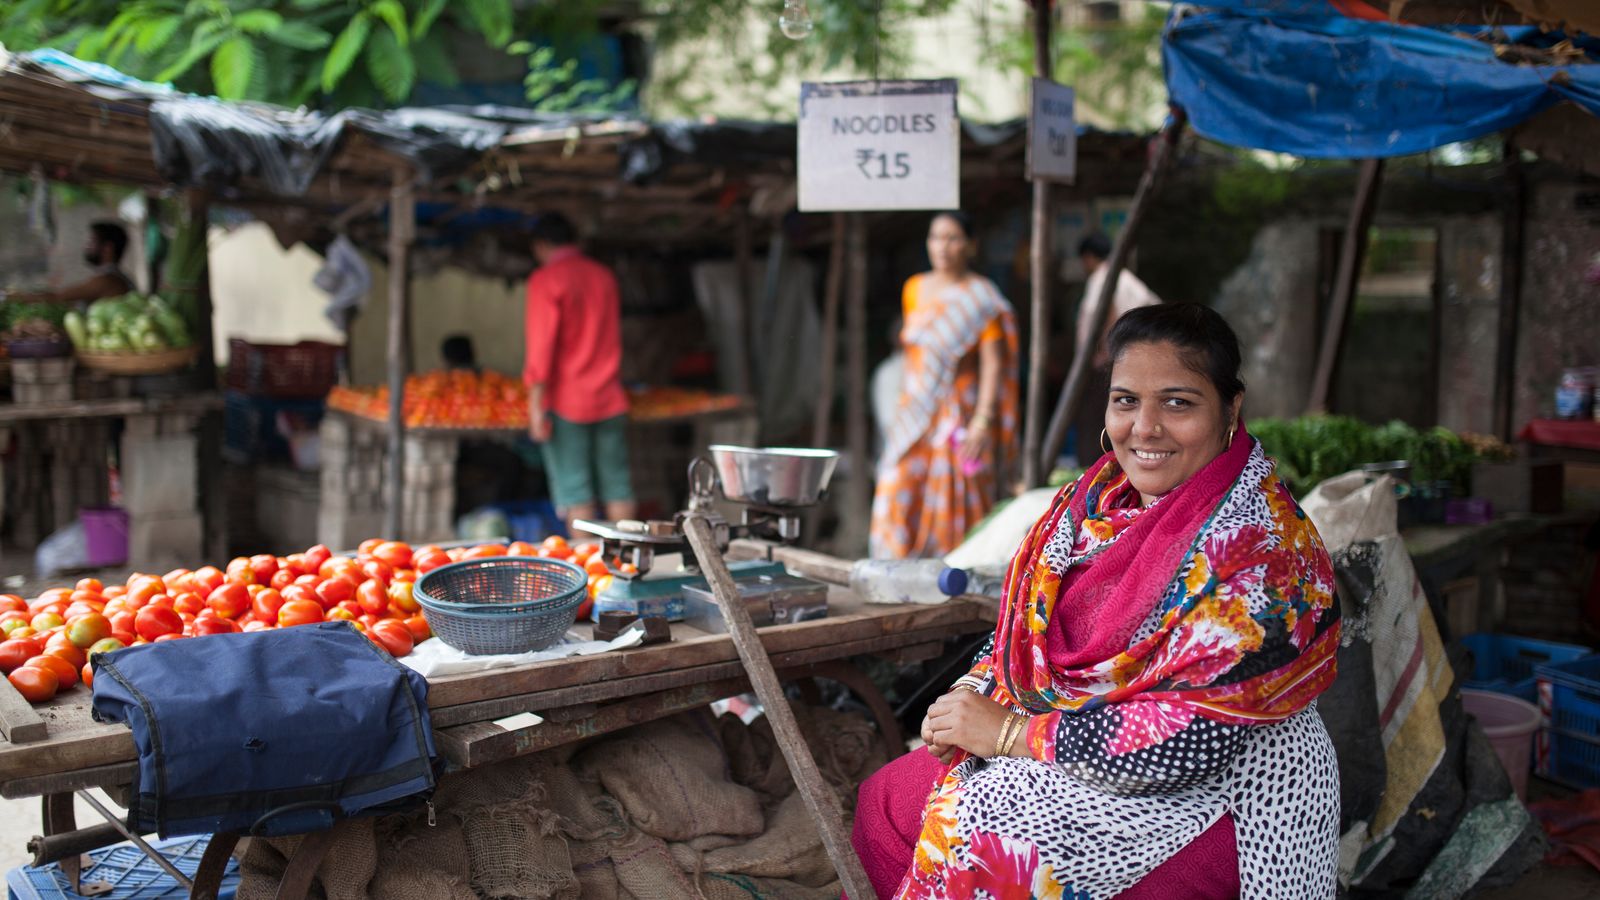 Woman sitting near her food stall, looking into the camera and smiling.